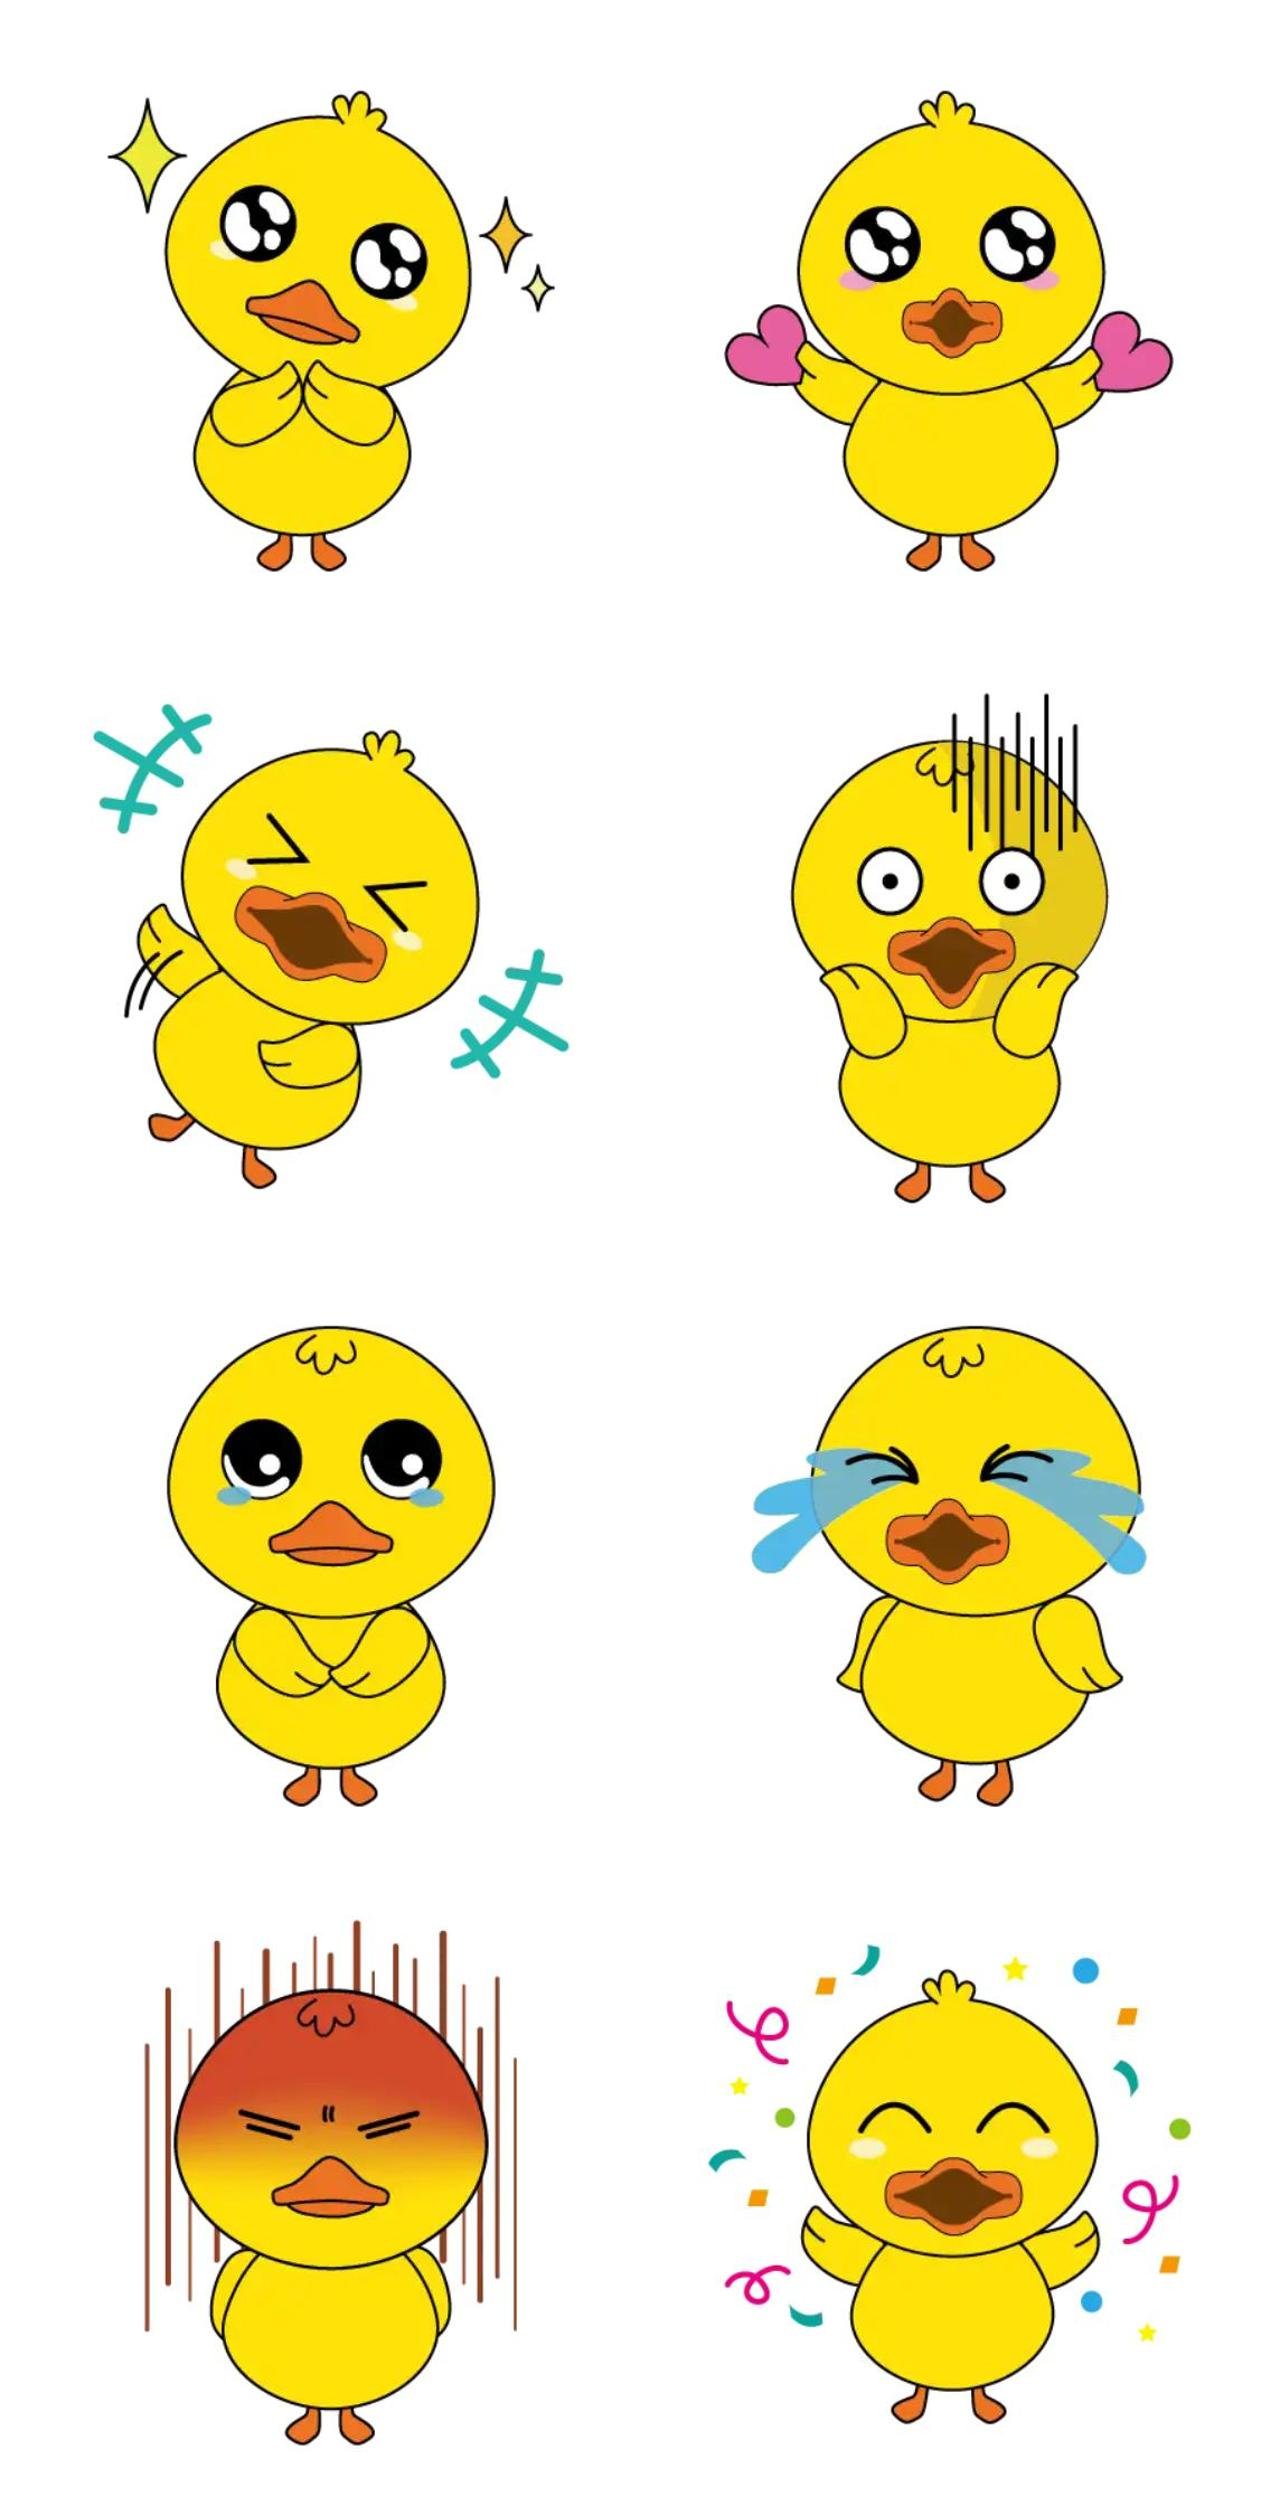 Twinkle Duck Animals sticker pack for Whatsapp, Telegram, Signal, and others chatting and message apps